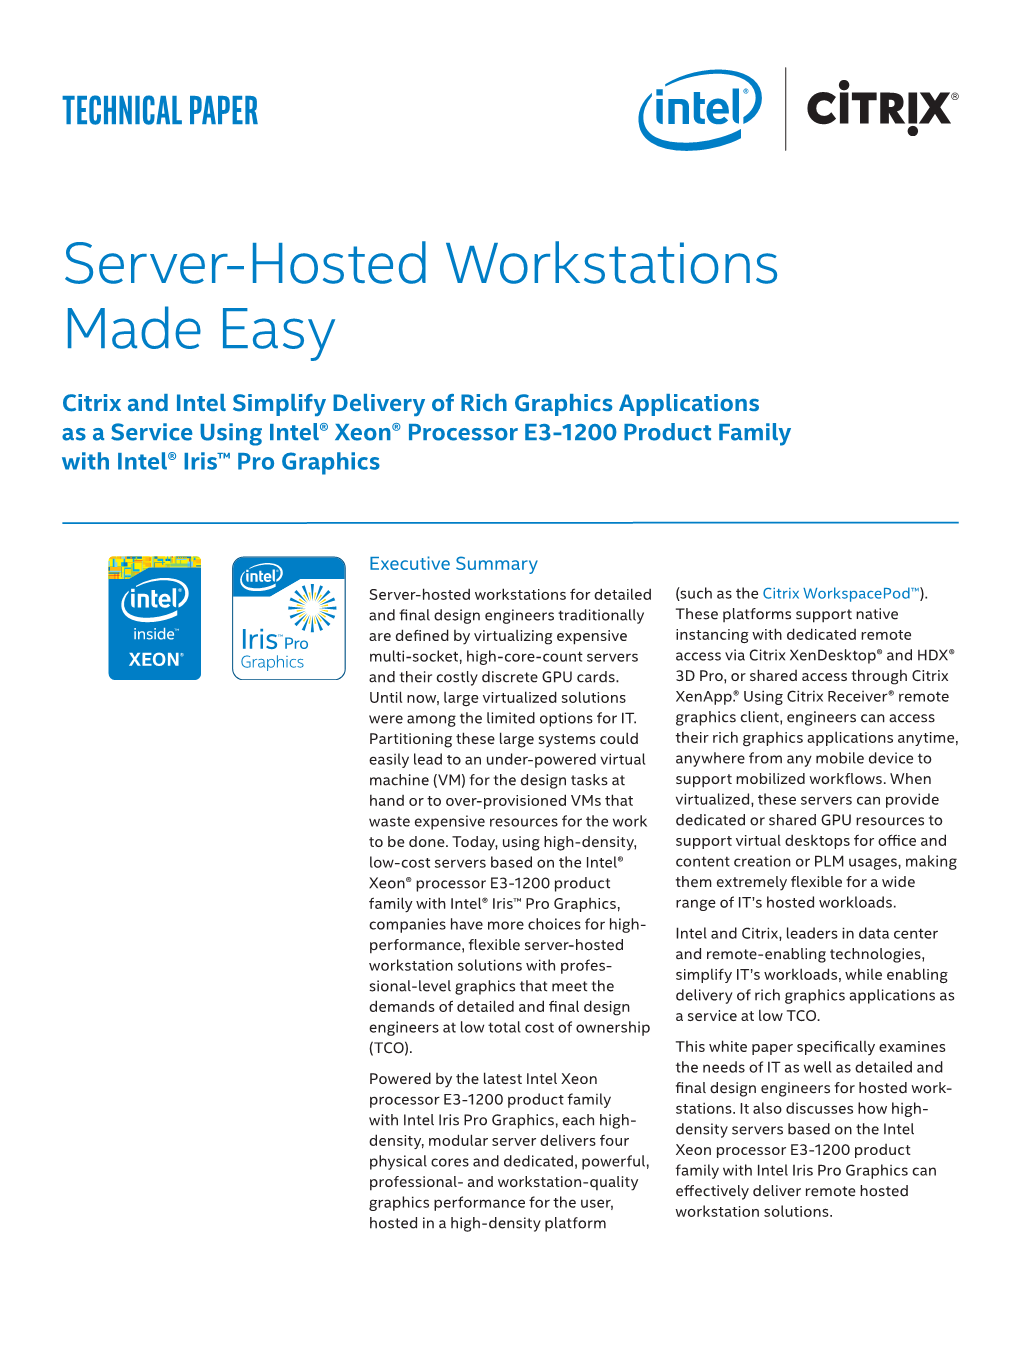 Tech Paper: Intel and Citrix Simplify Server-Hosted Workstations